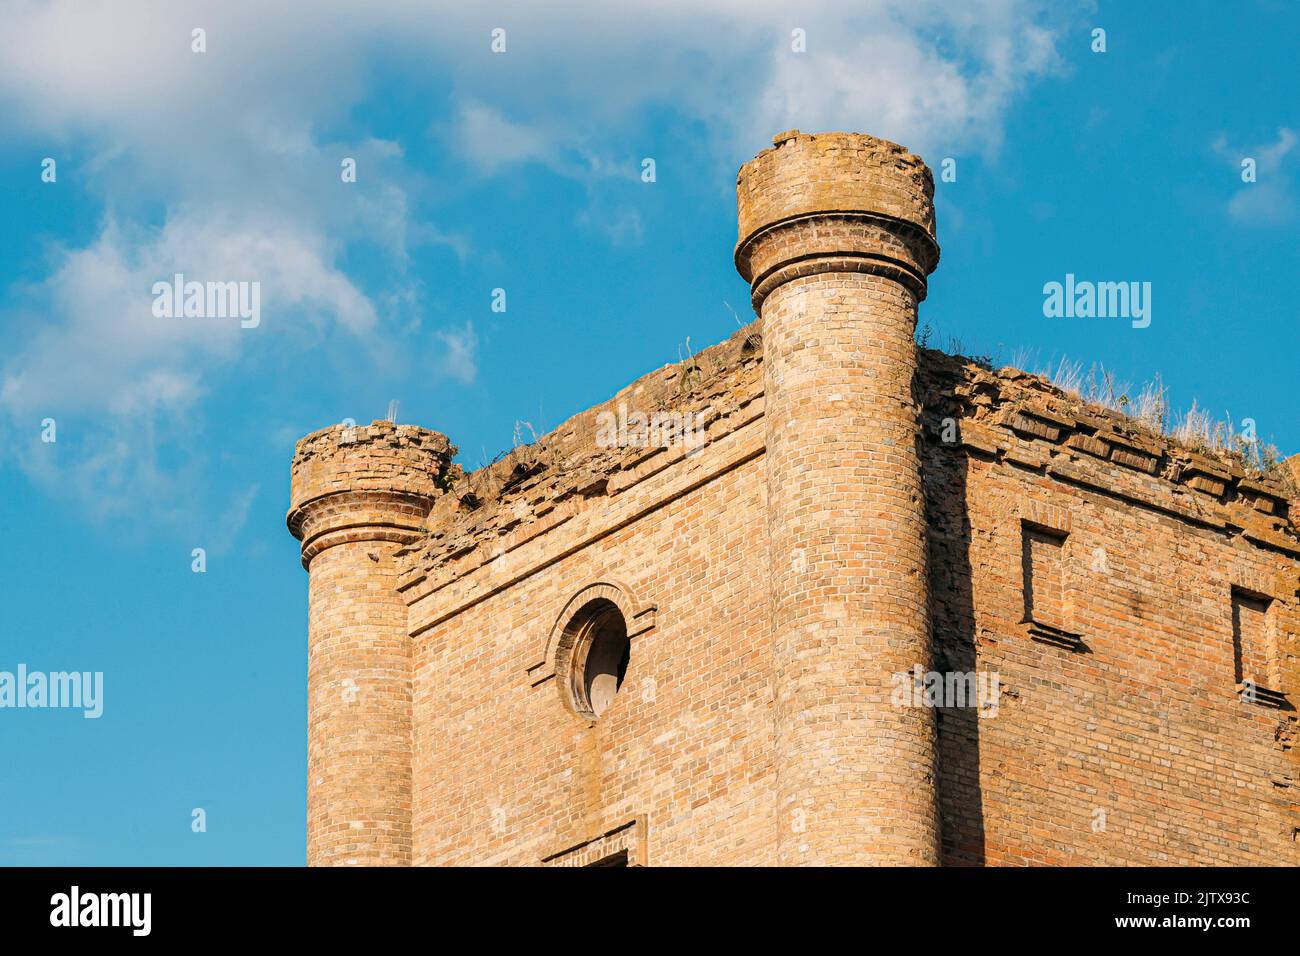 Belarus - Remains Of Yastrzhembsky Estate And Park Complex. Old Five-storey Brick Water Tower. Borisovshchyna, Khoiniki District, Belarus. close up. Stock Photo